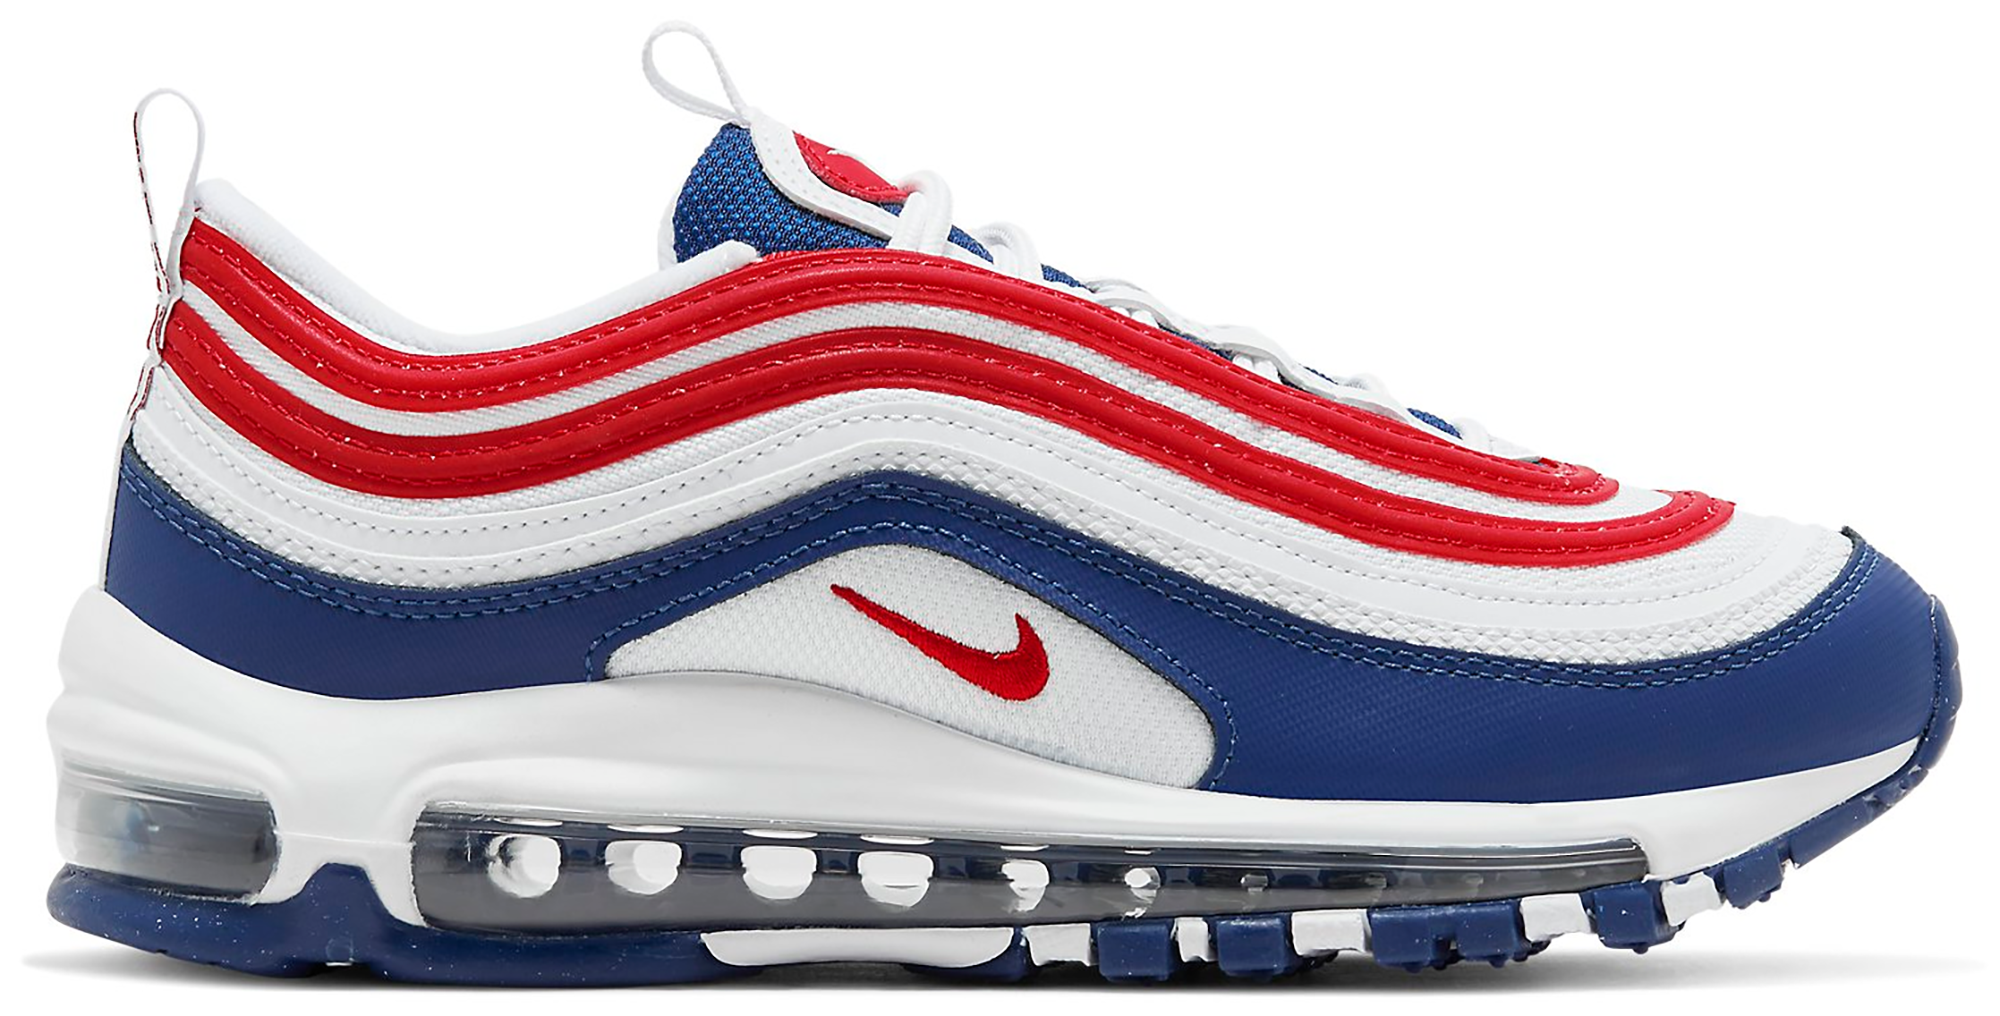 air max 97 blue white and red